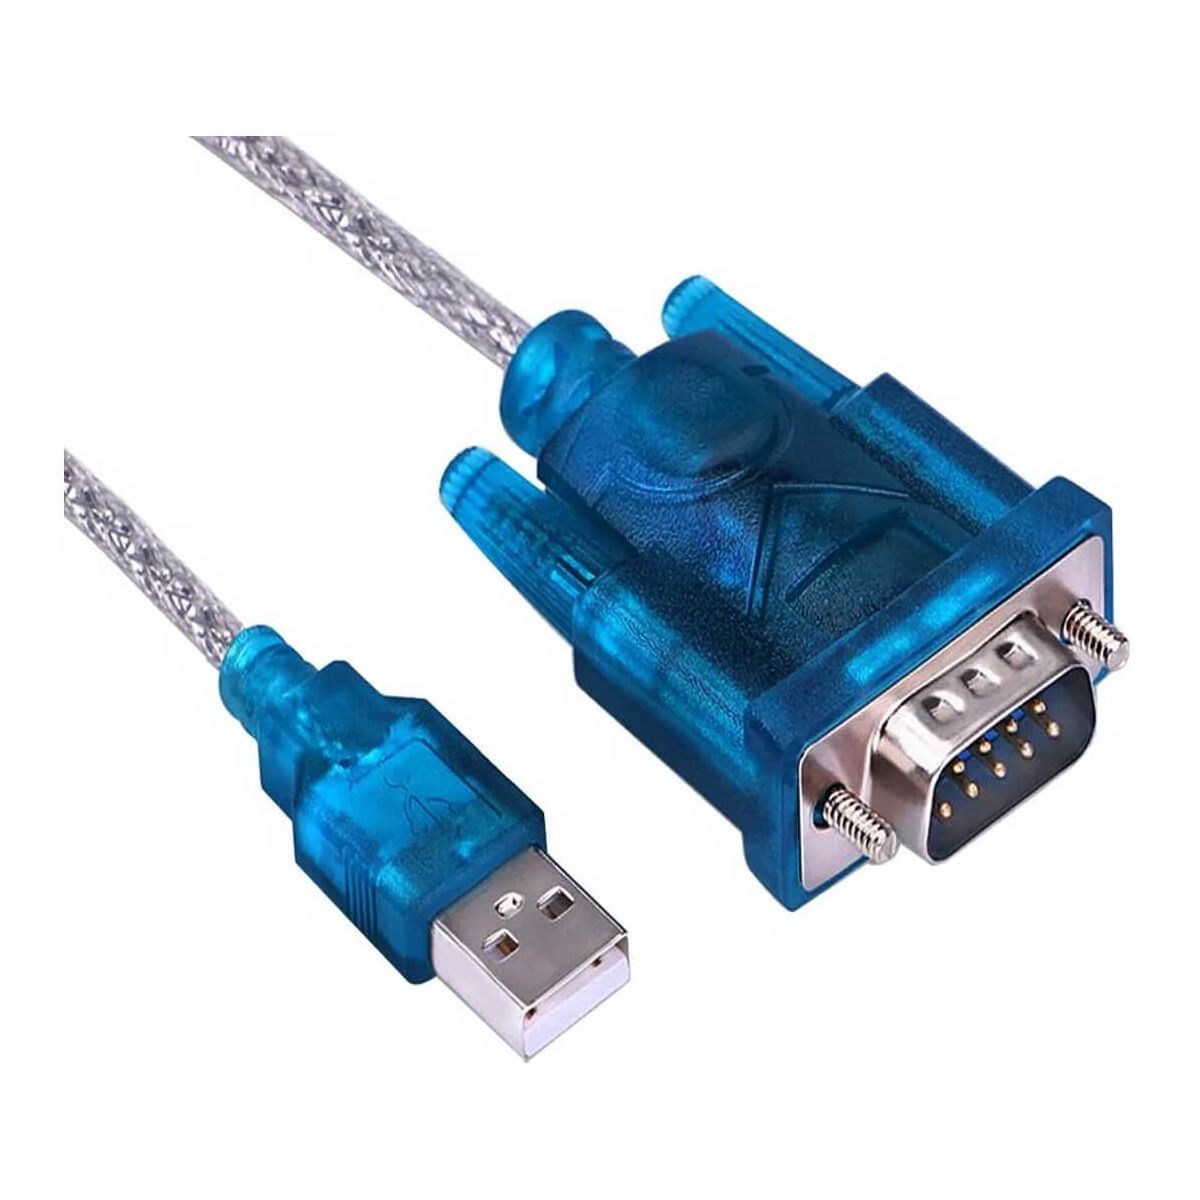 CABLE USB A SERIAL EF-0007F